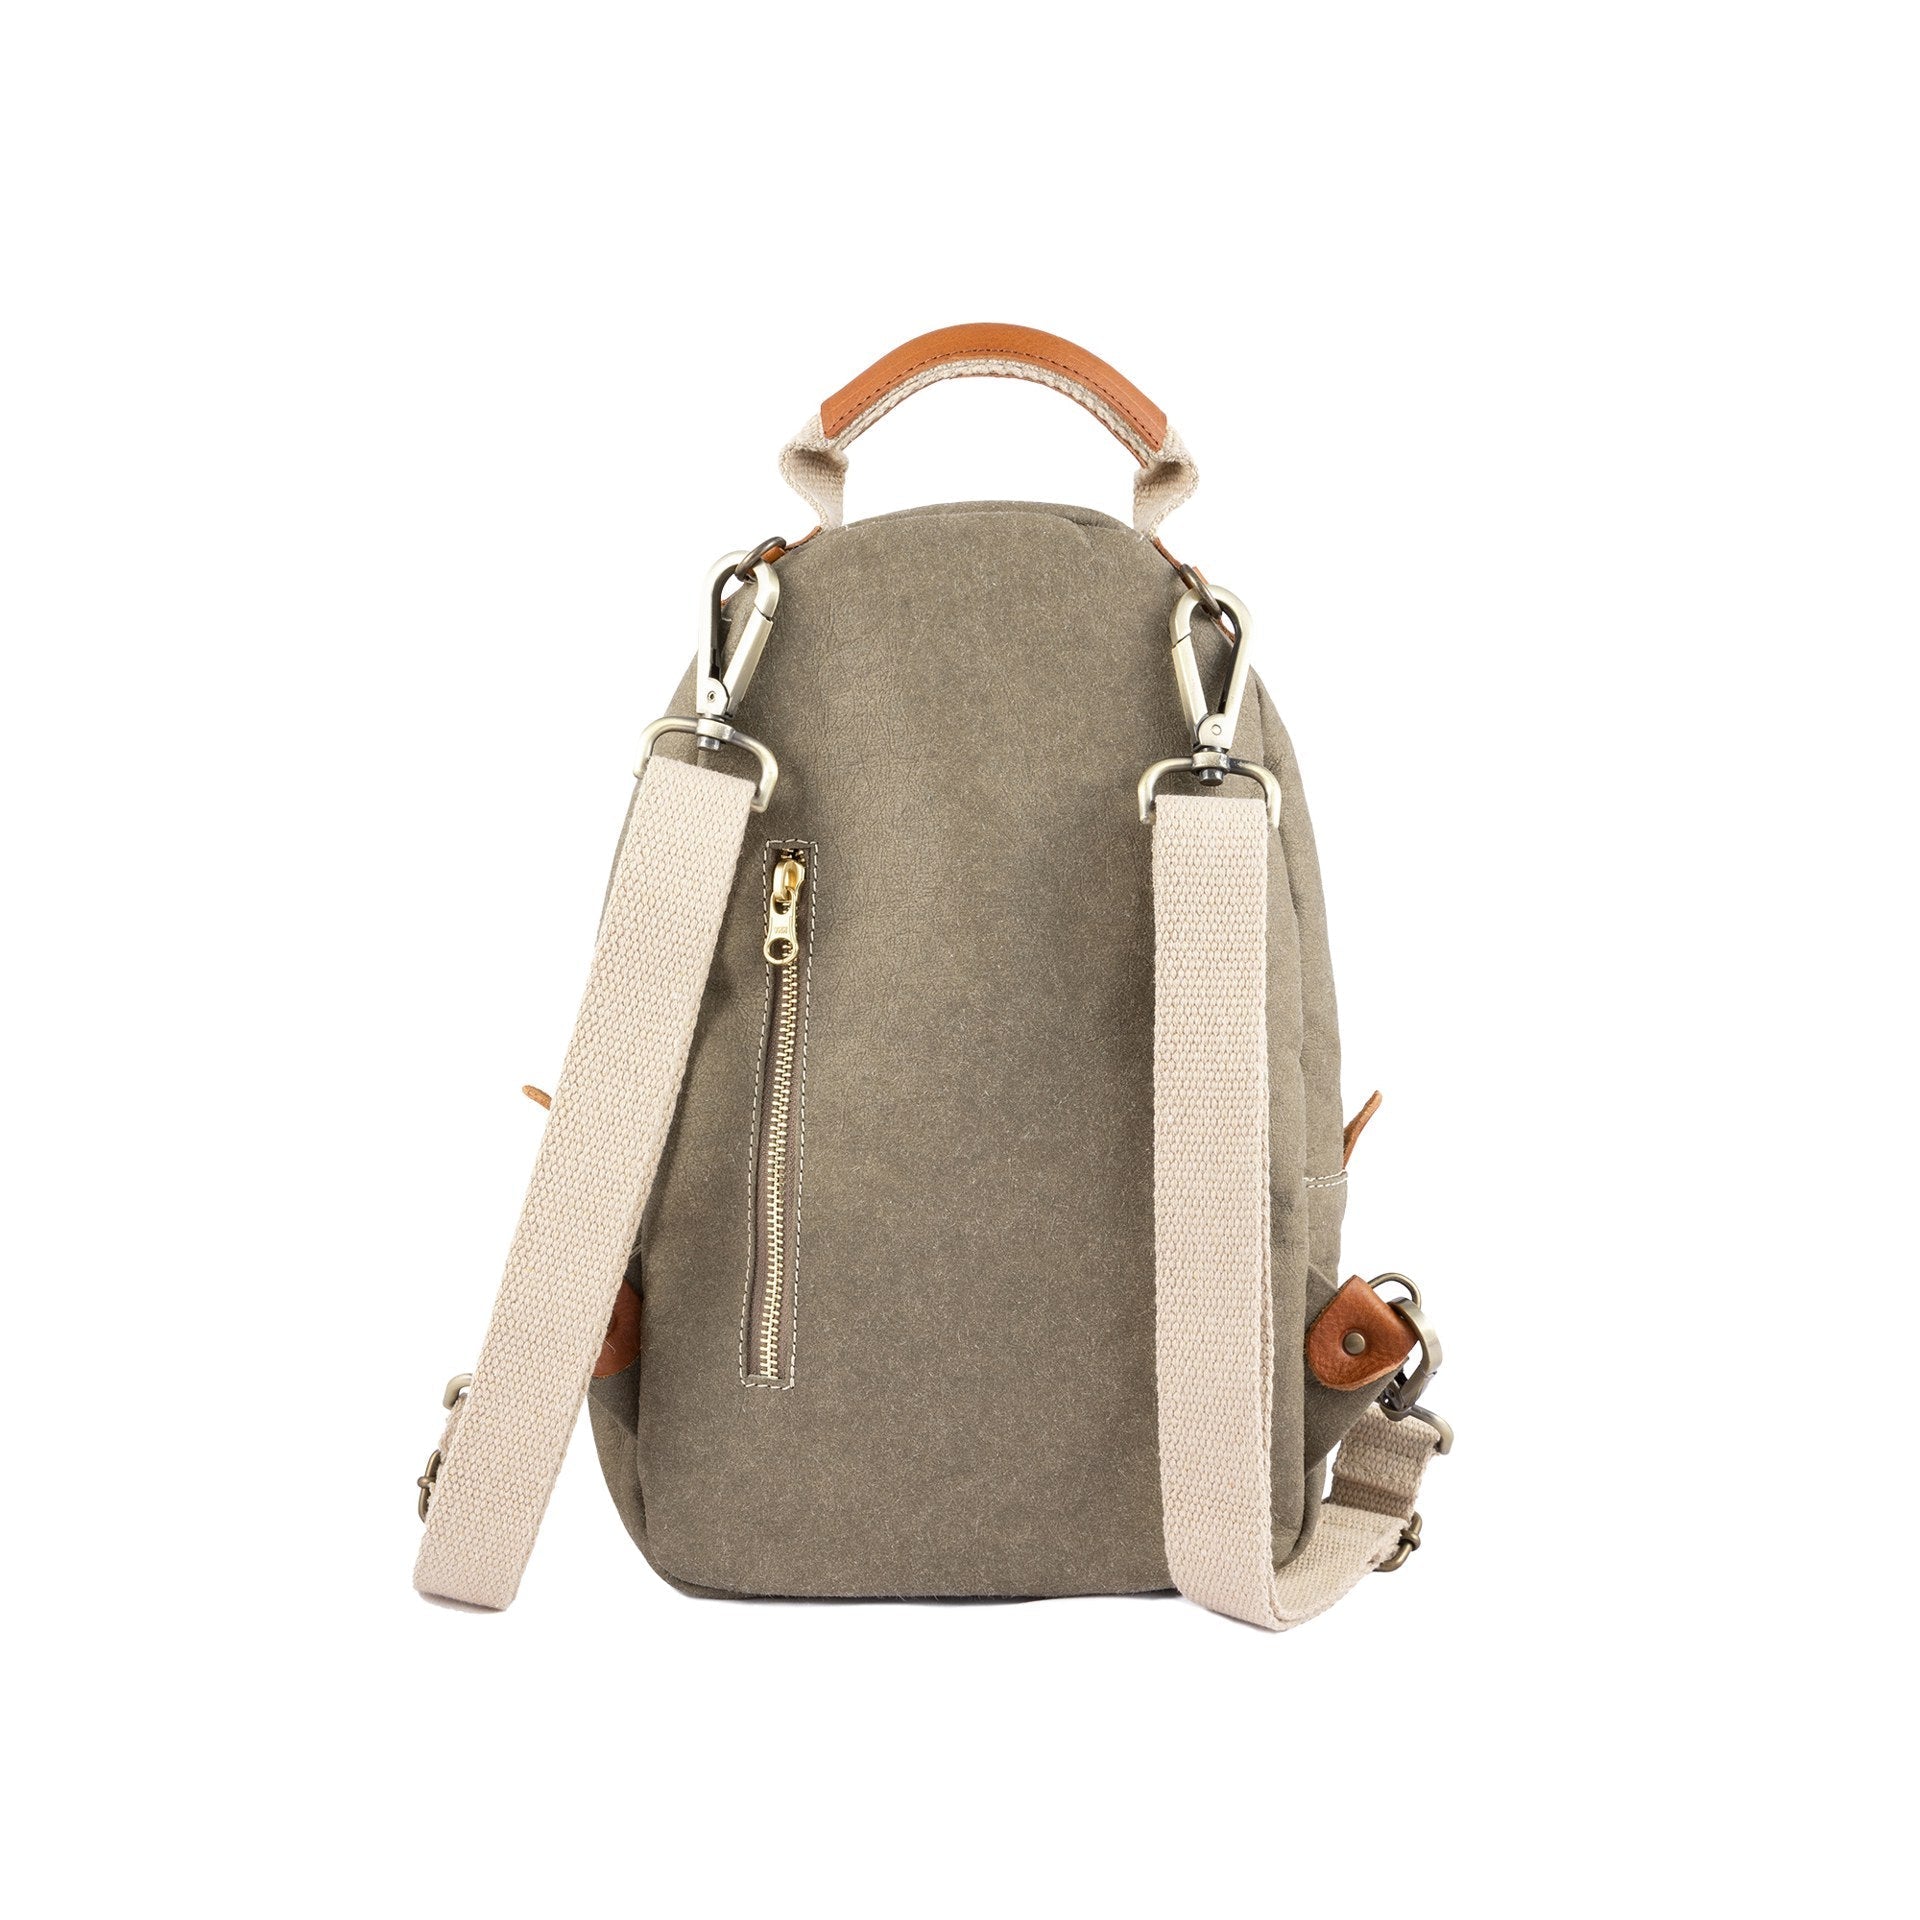 A pale khaki washable paper backpack is shown from a back angle. It features two adjustable cream canvas shoulder straps and a silver zip pocket in the rear.